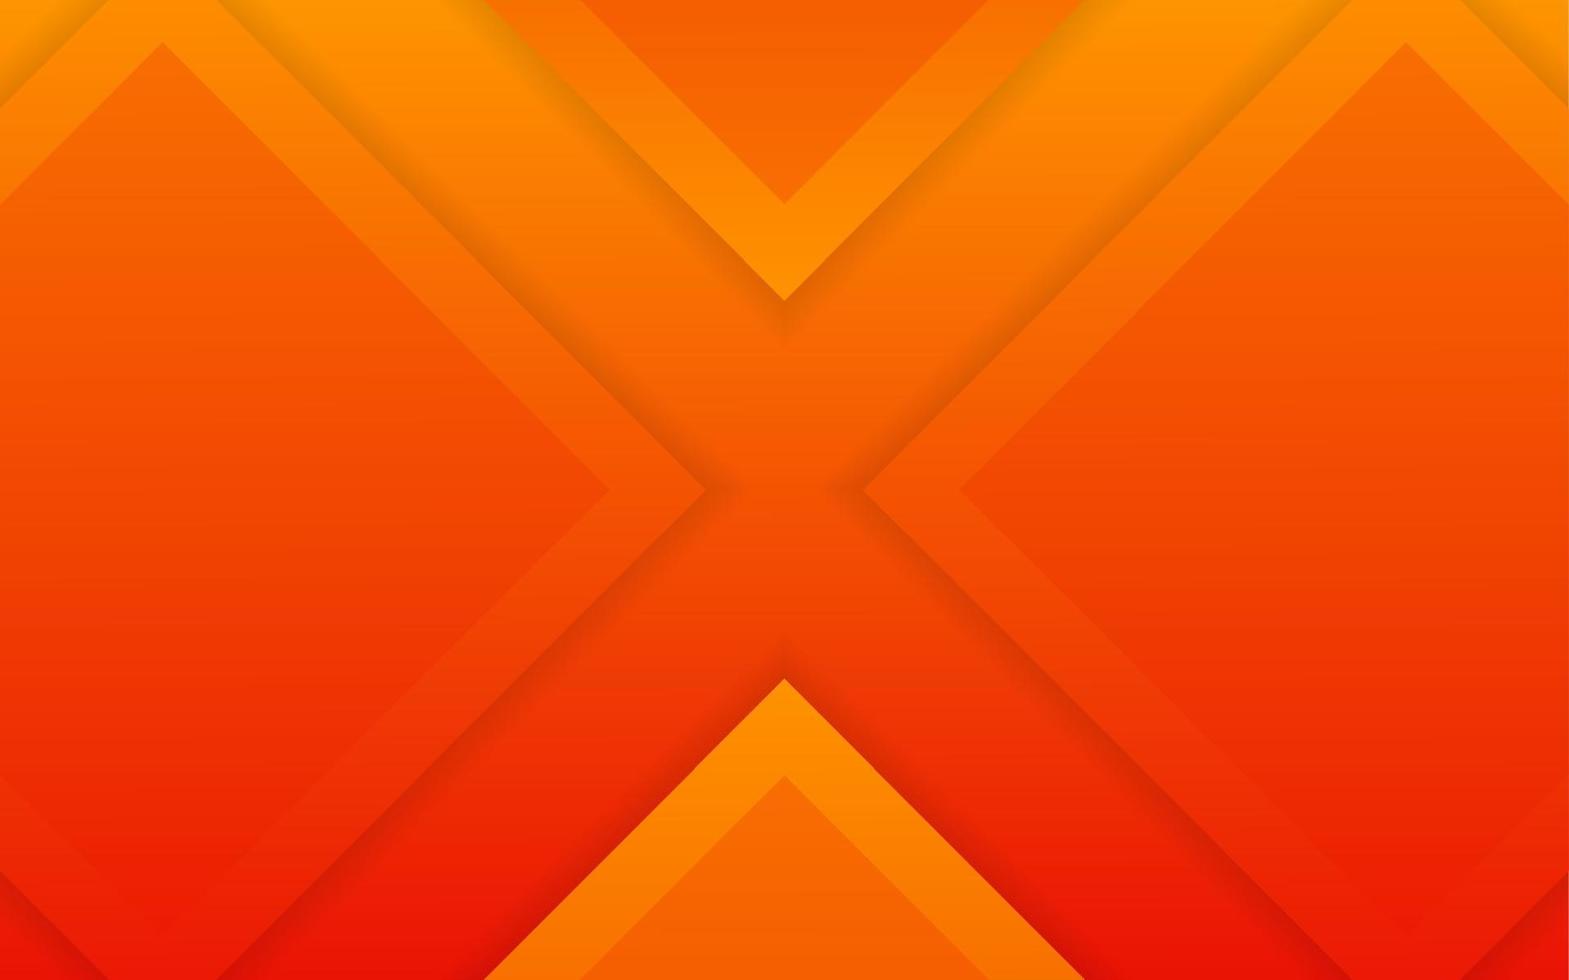 Abstract colorful orange wave background vector